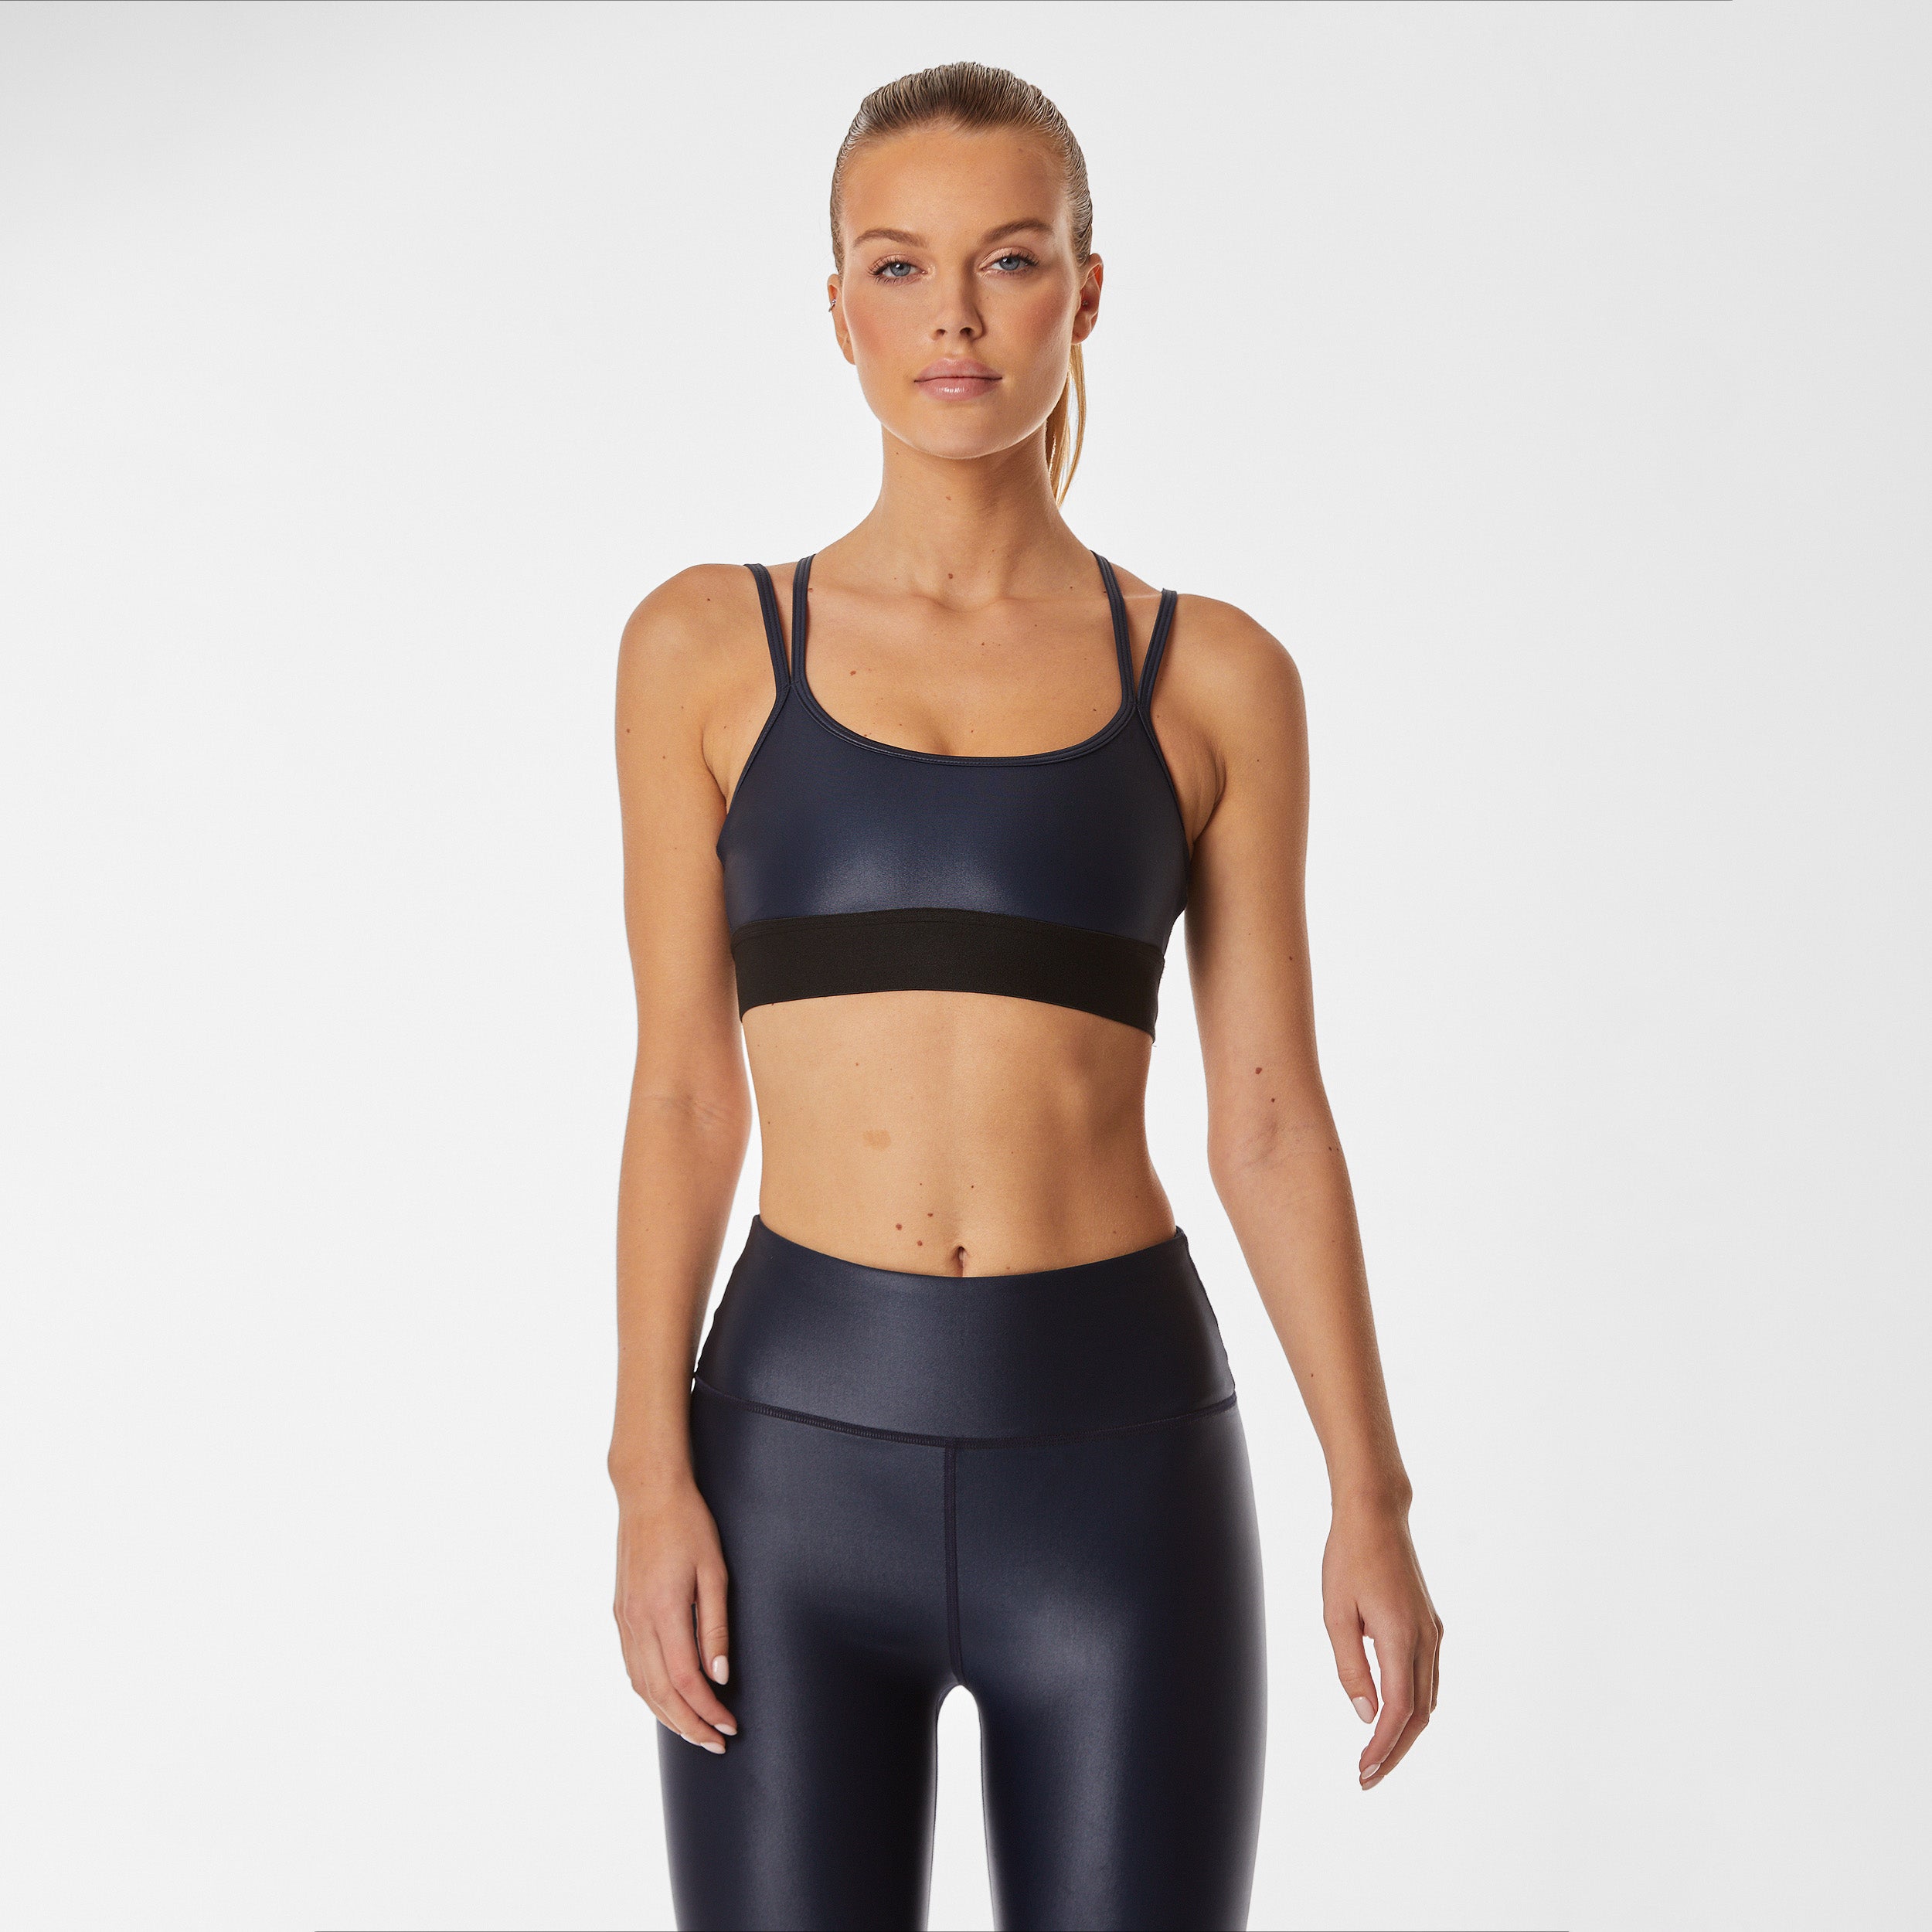 Front view of woman wearing navy blue gloss liquid sports bra featuring a scoop neckline and an alluring strappy back with a supportive elastic band